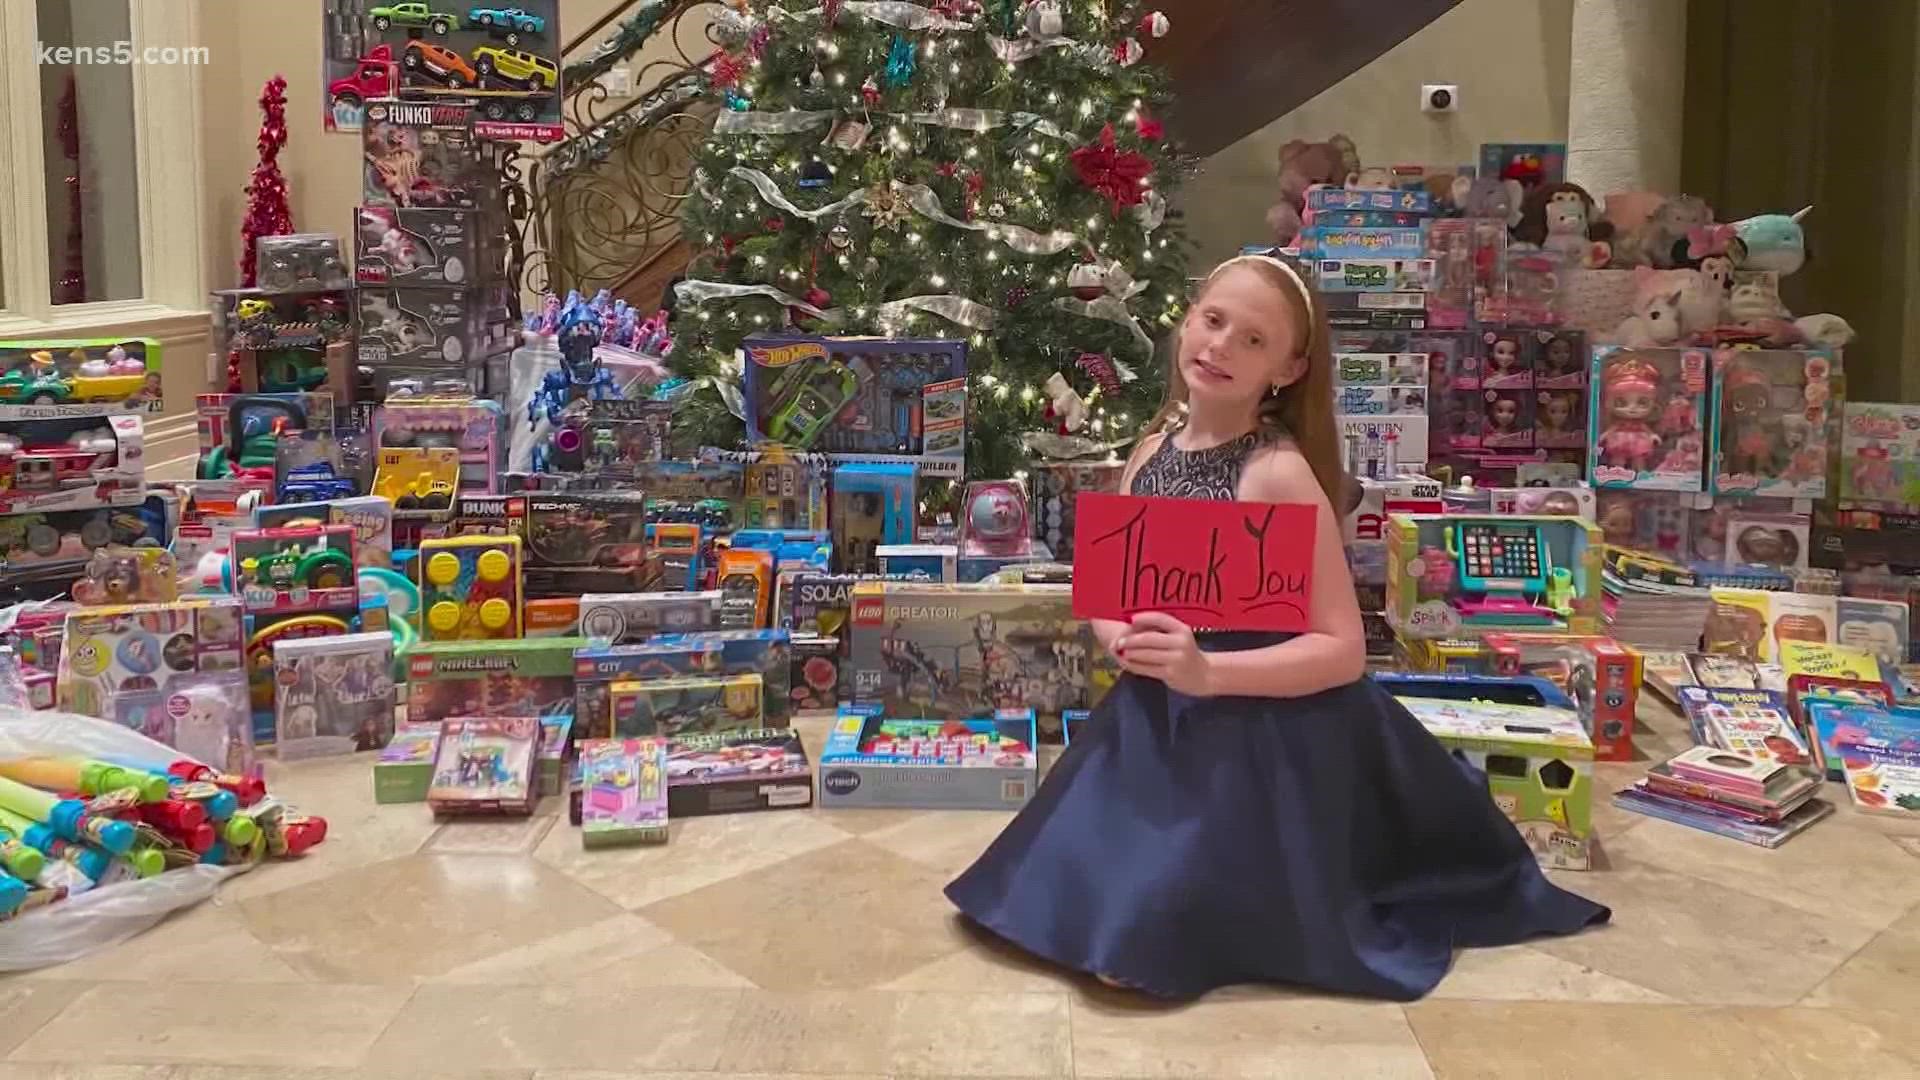 Addison Meyer is the face, name and spark behind an effort to make sure pediatric patients at University Hospital have a gift for Christmas.